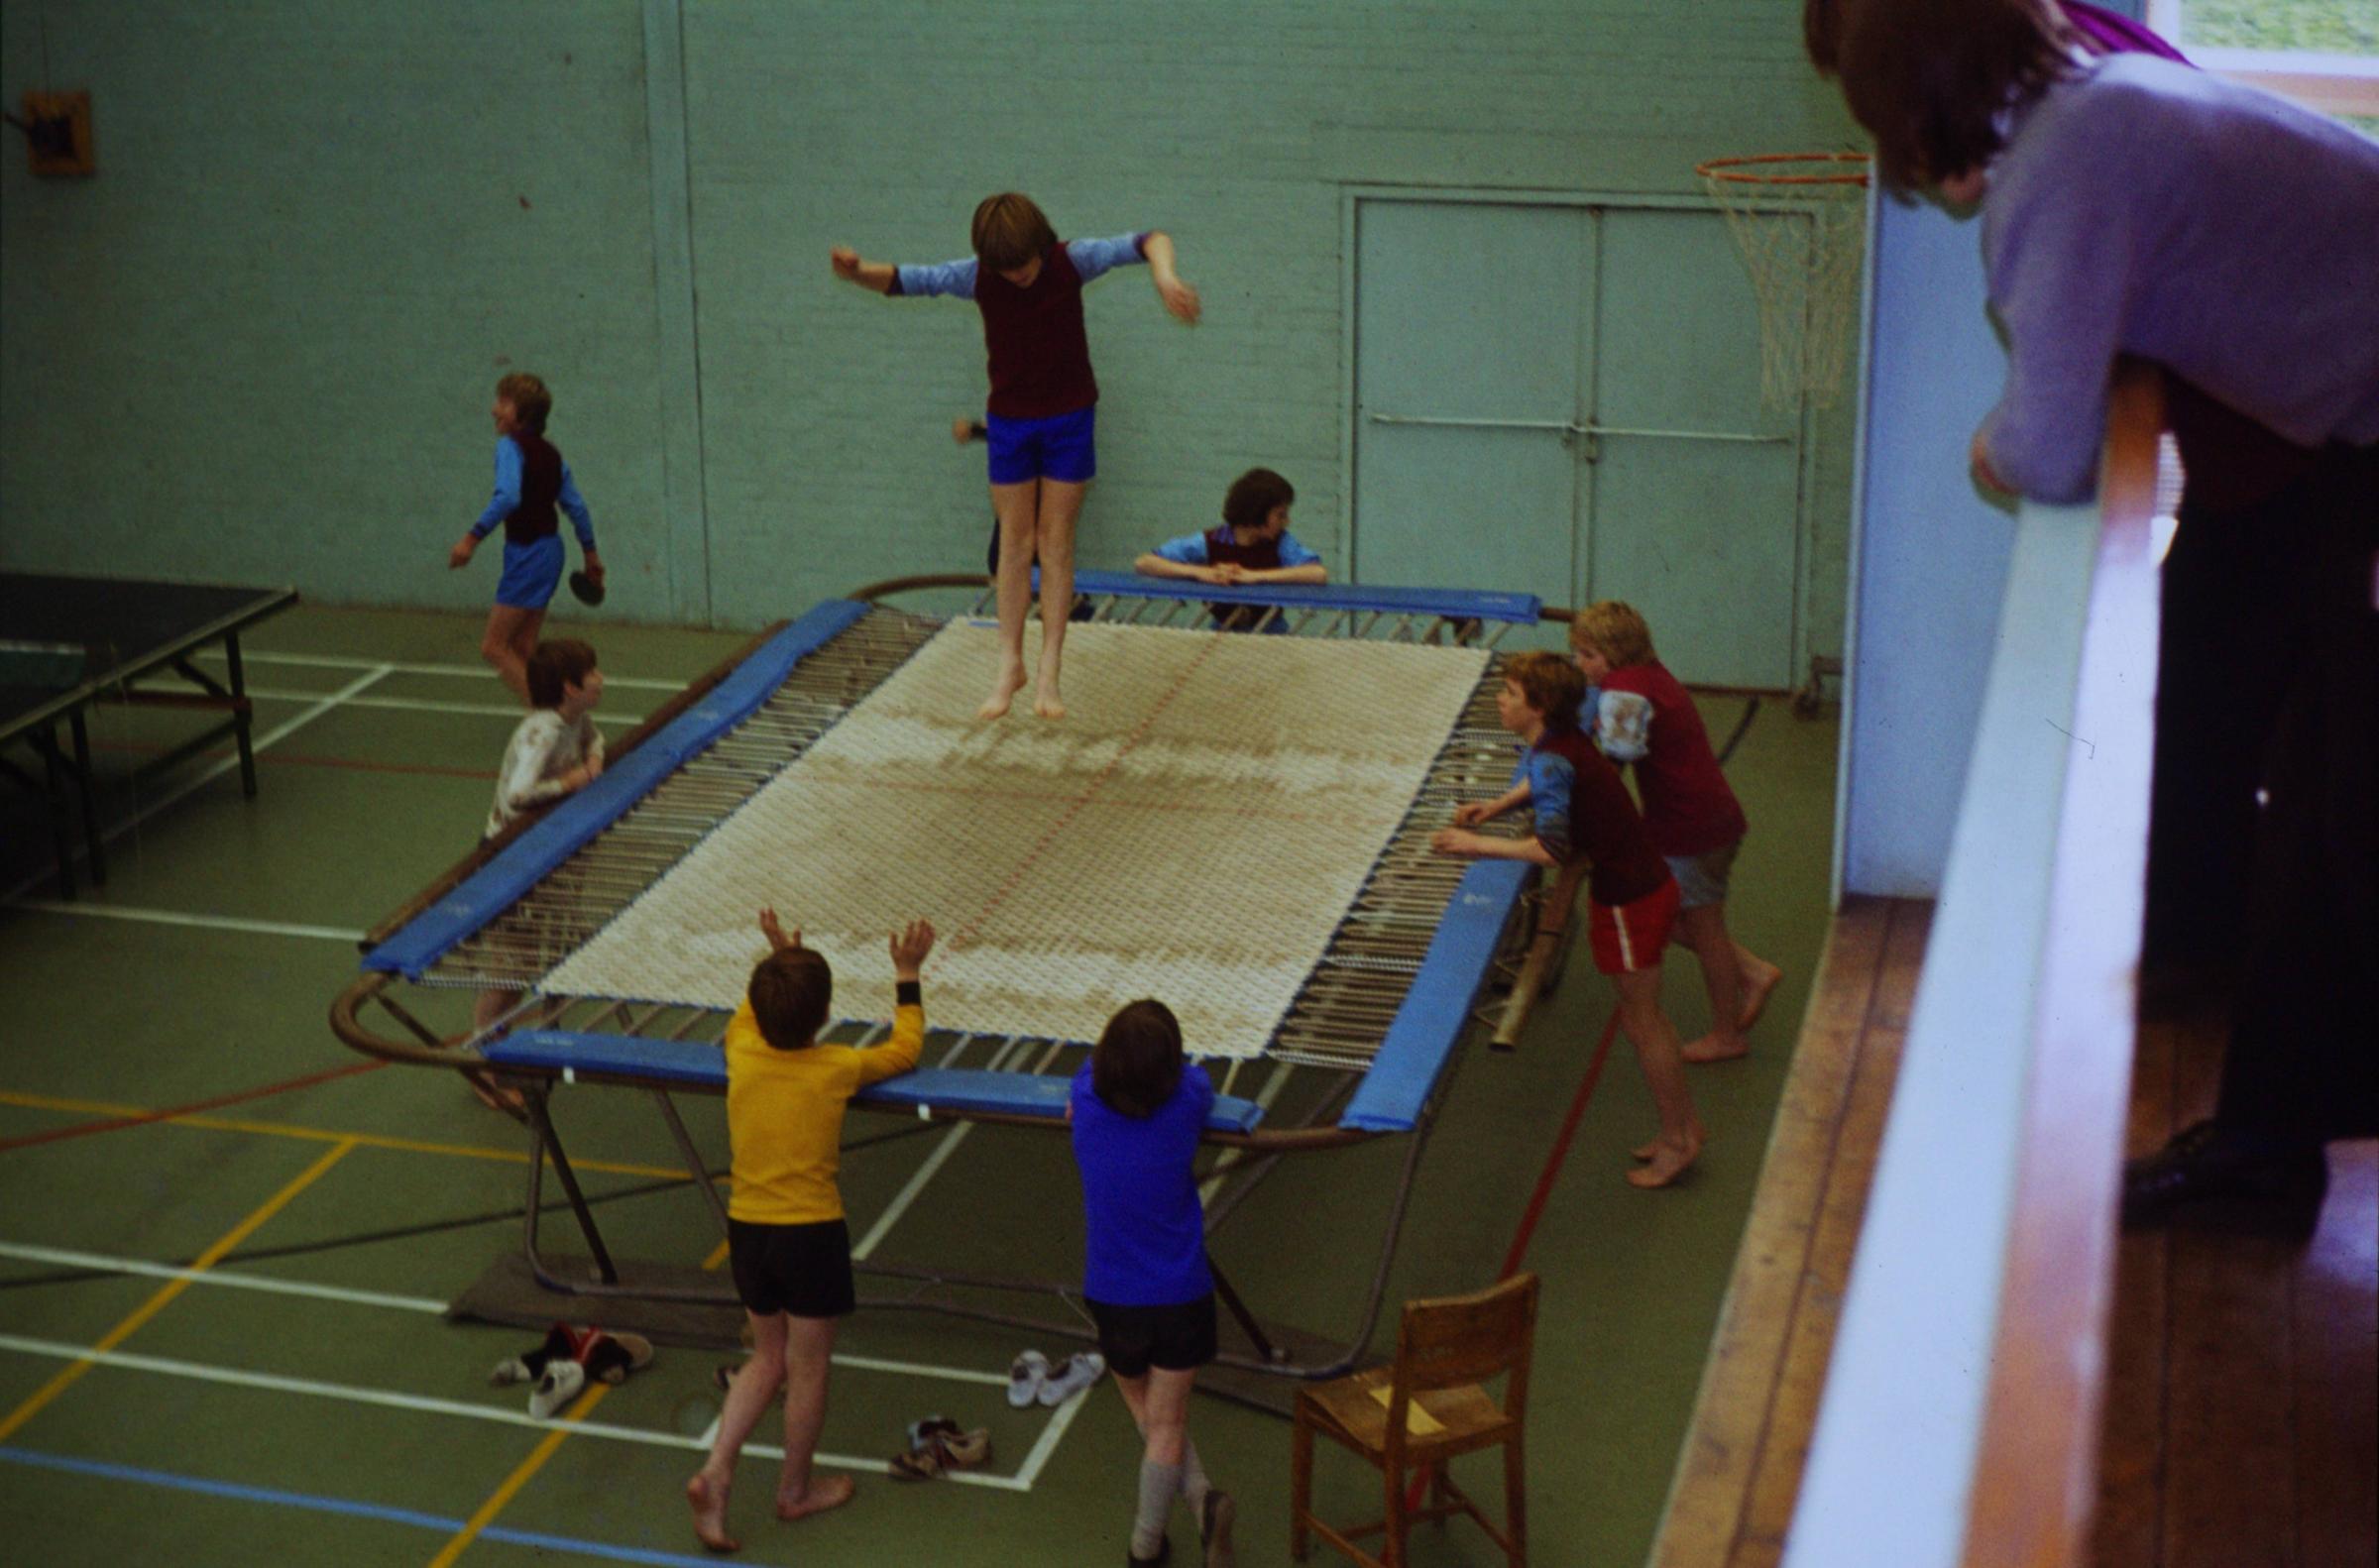 Trampolining at the former Samuel Southalls school (now Bishop Perowne) in the mid 1970s